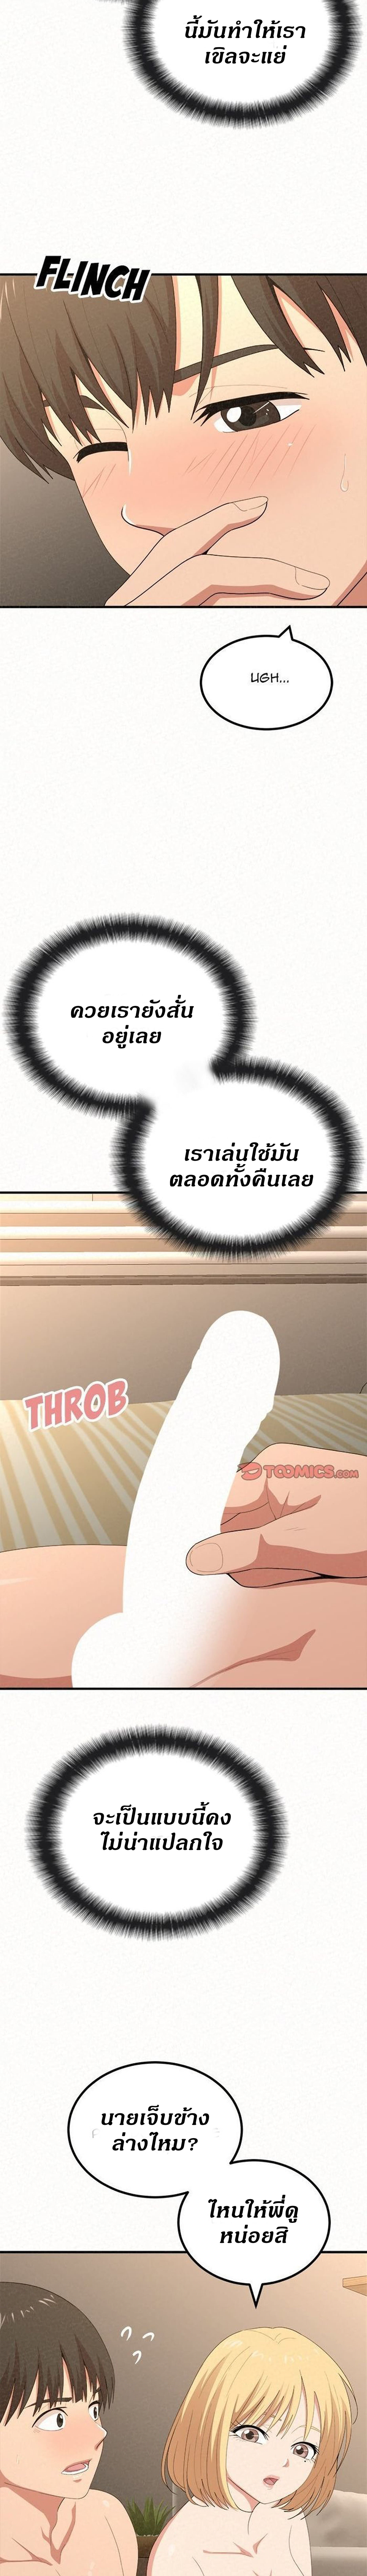 Milk therapy 14 (6)